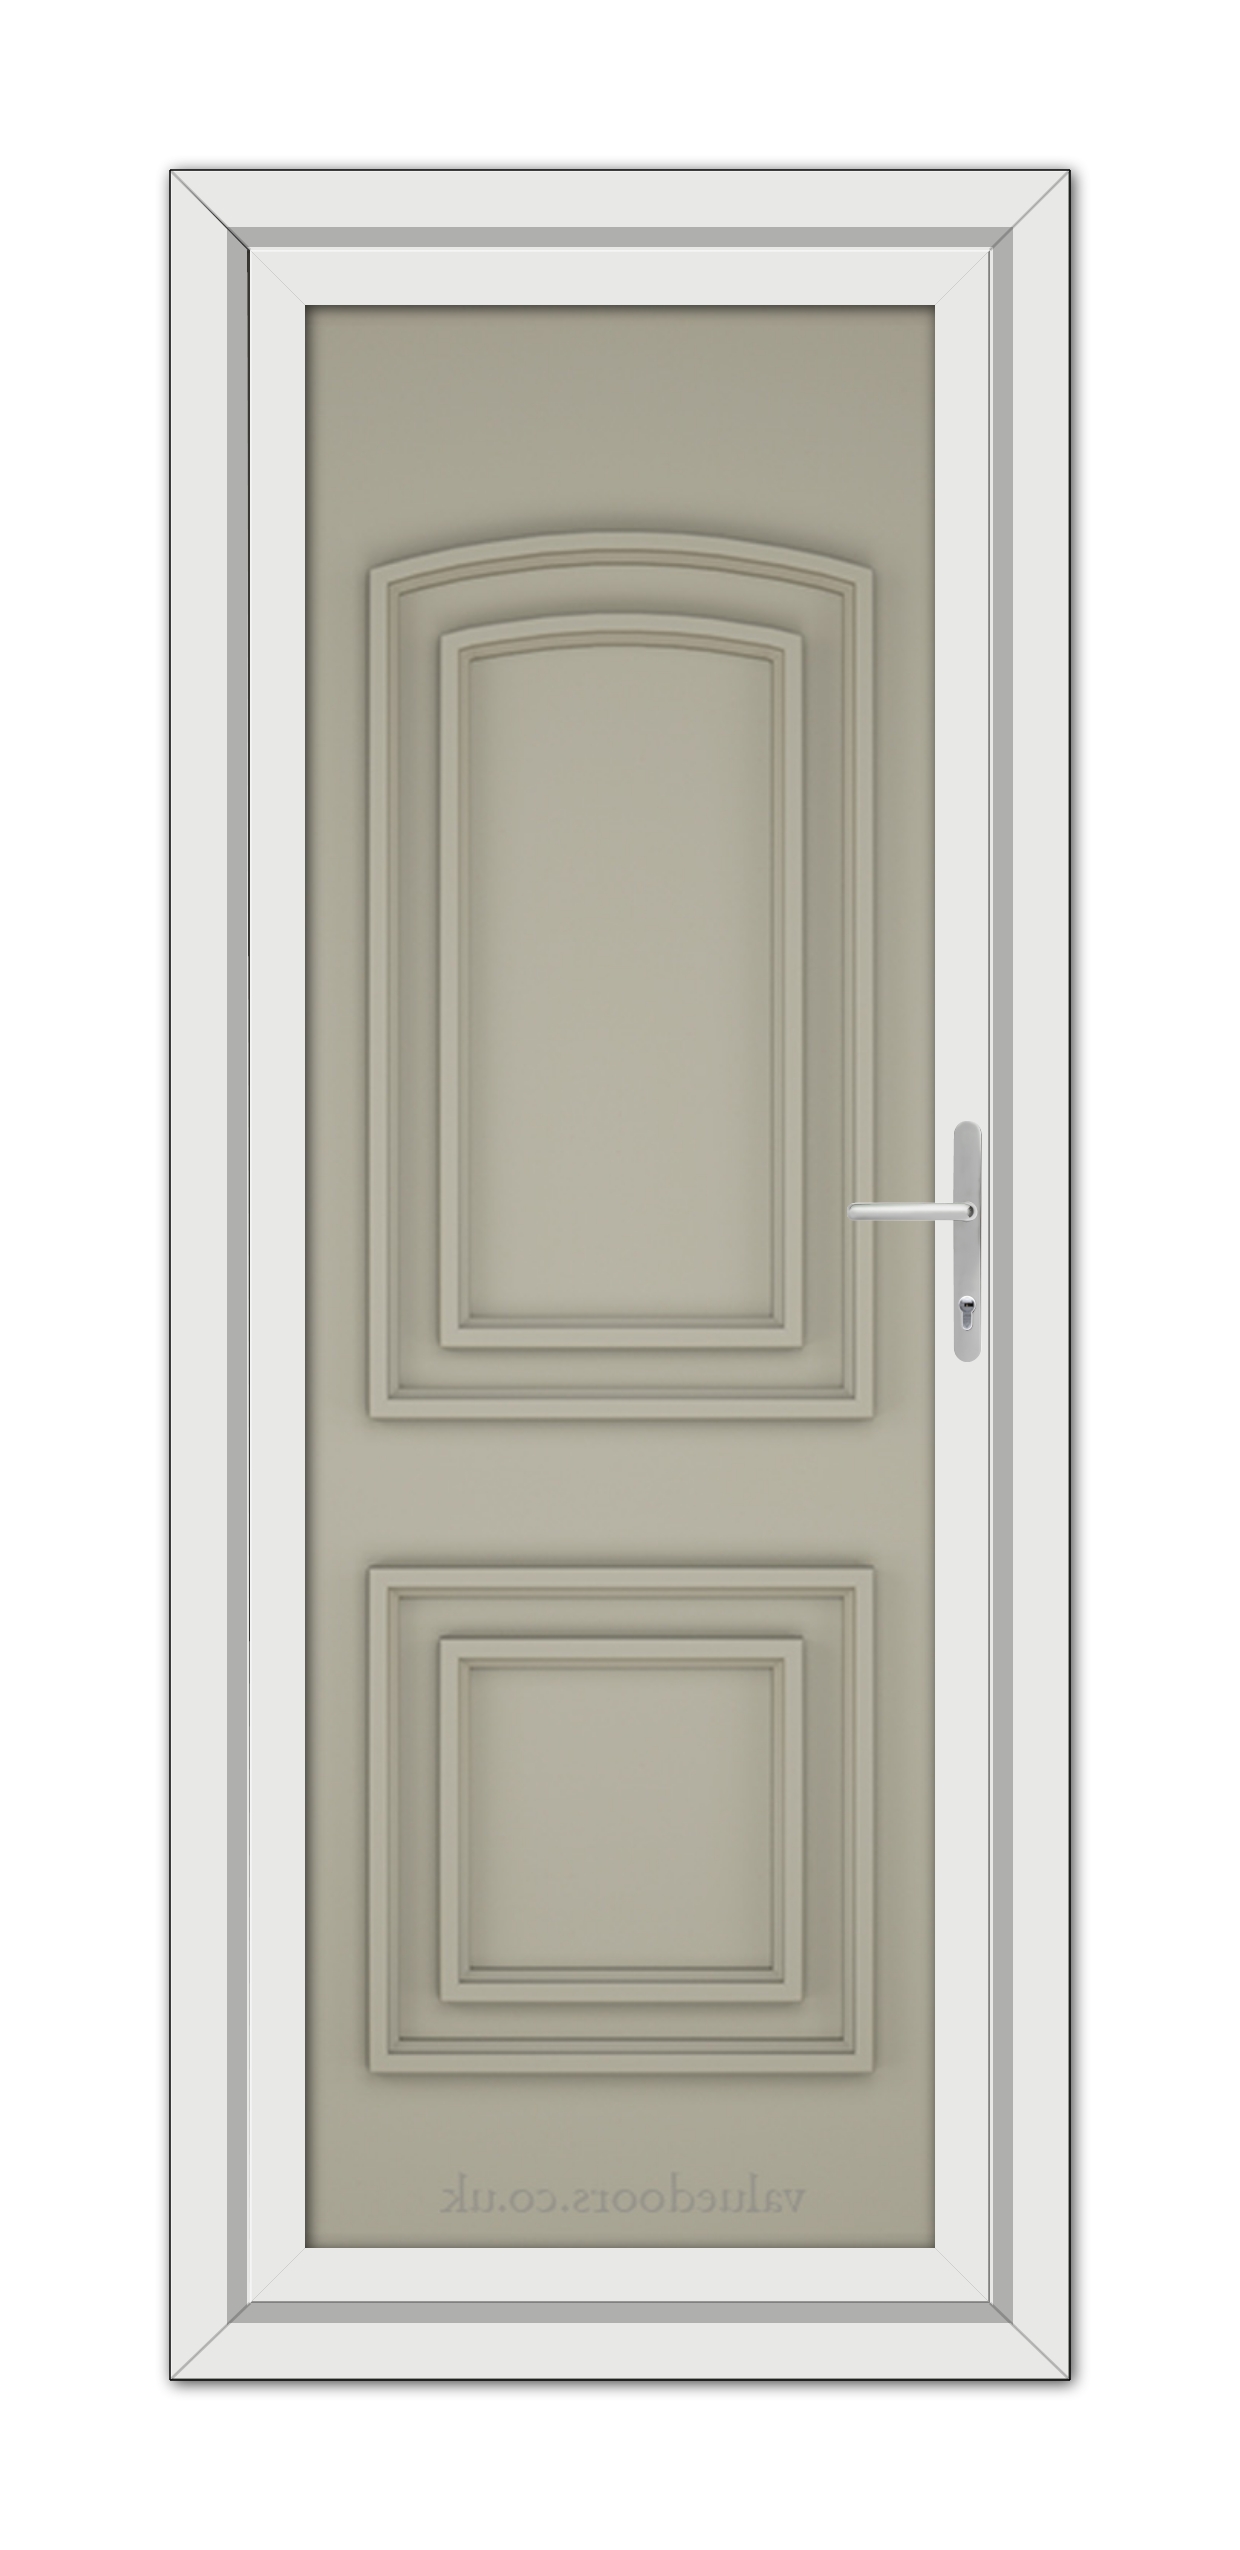 A modern closed Pebble Grey Balmoral Solid uPVC door with a silver handle, set within a white door frame, viewed from the front.